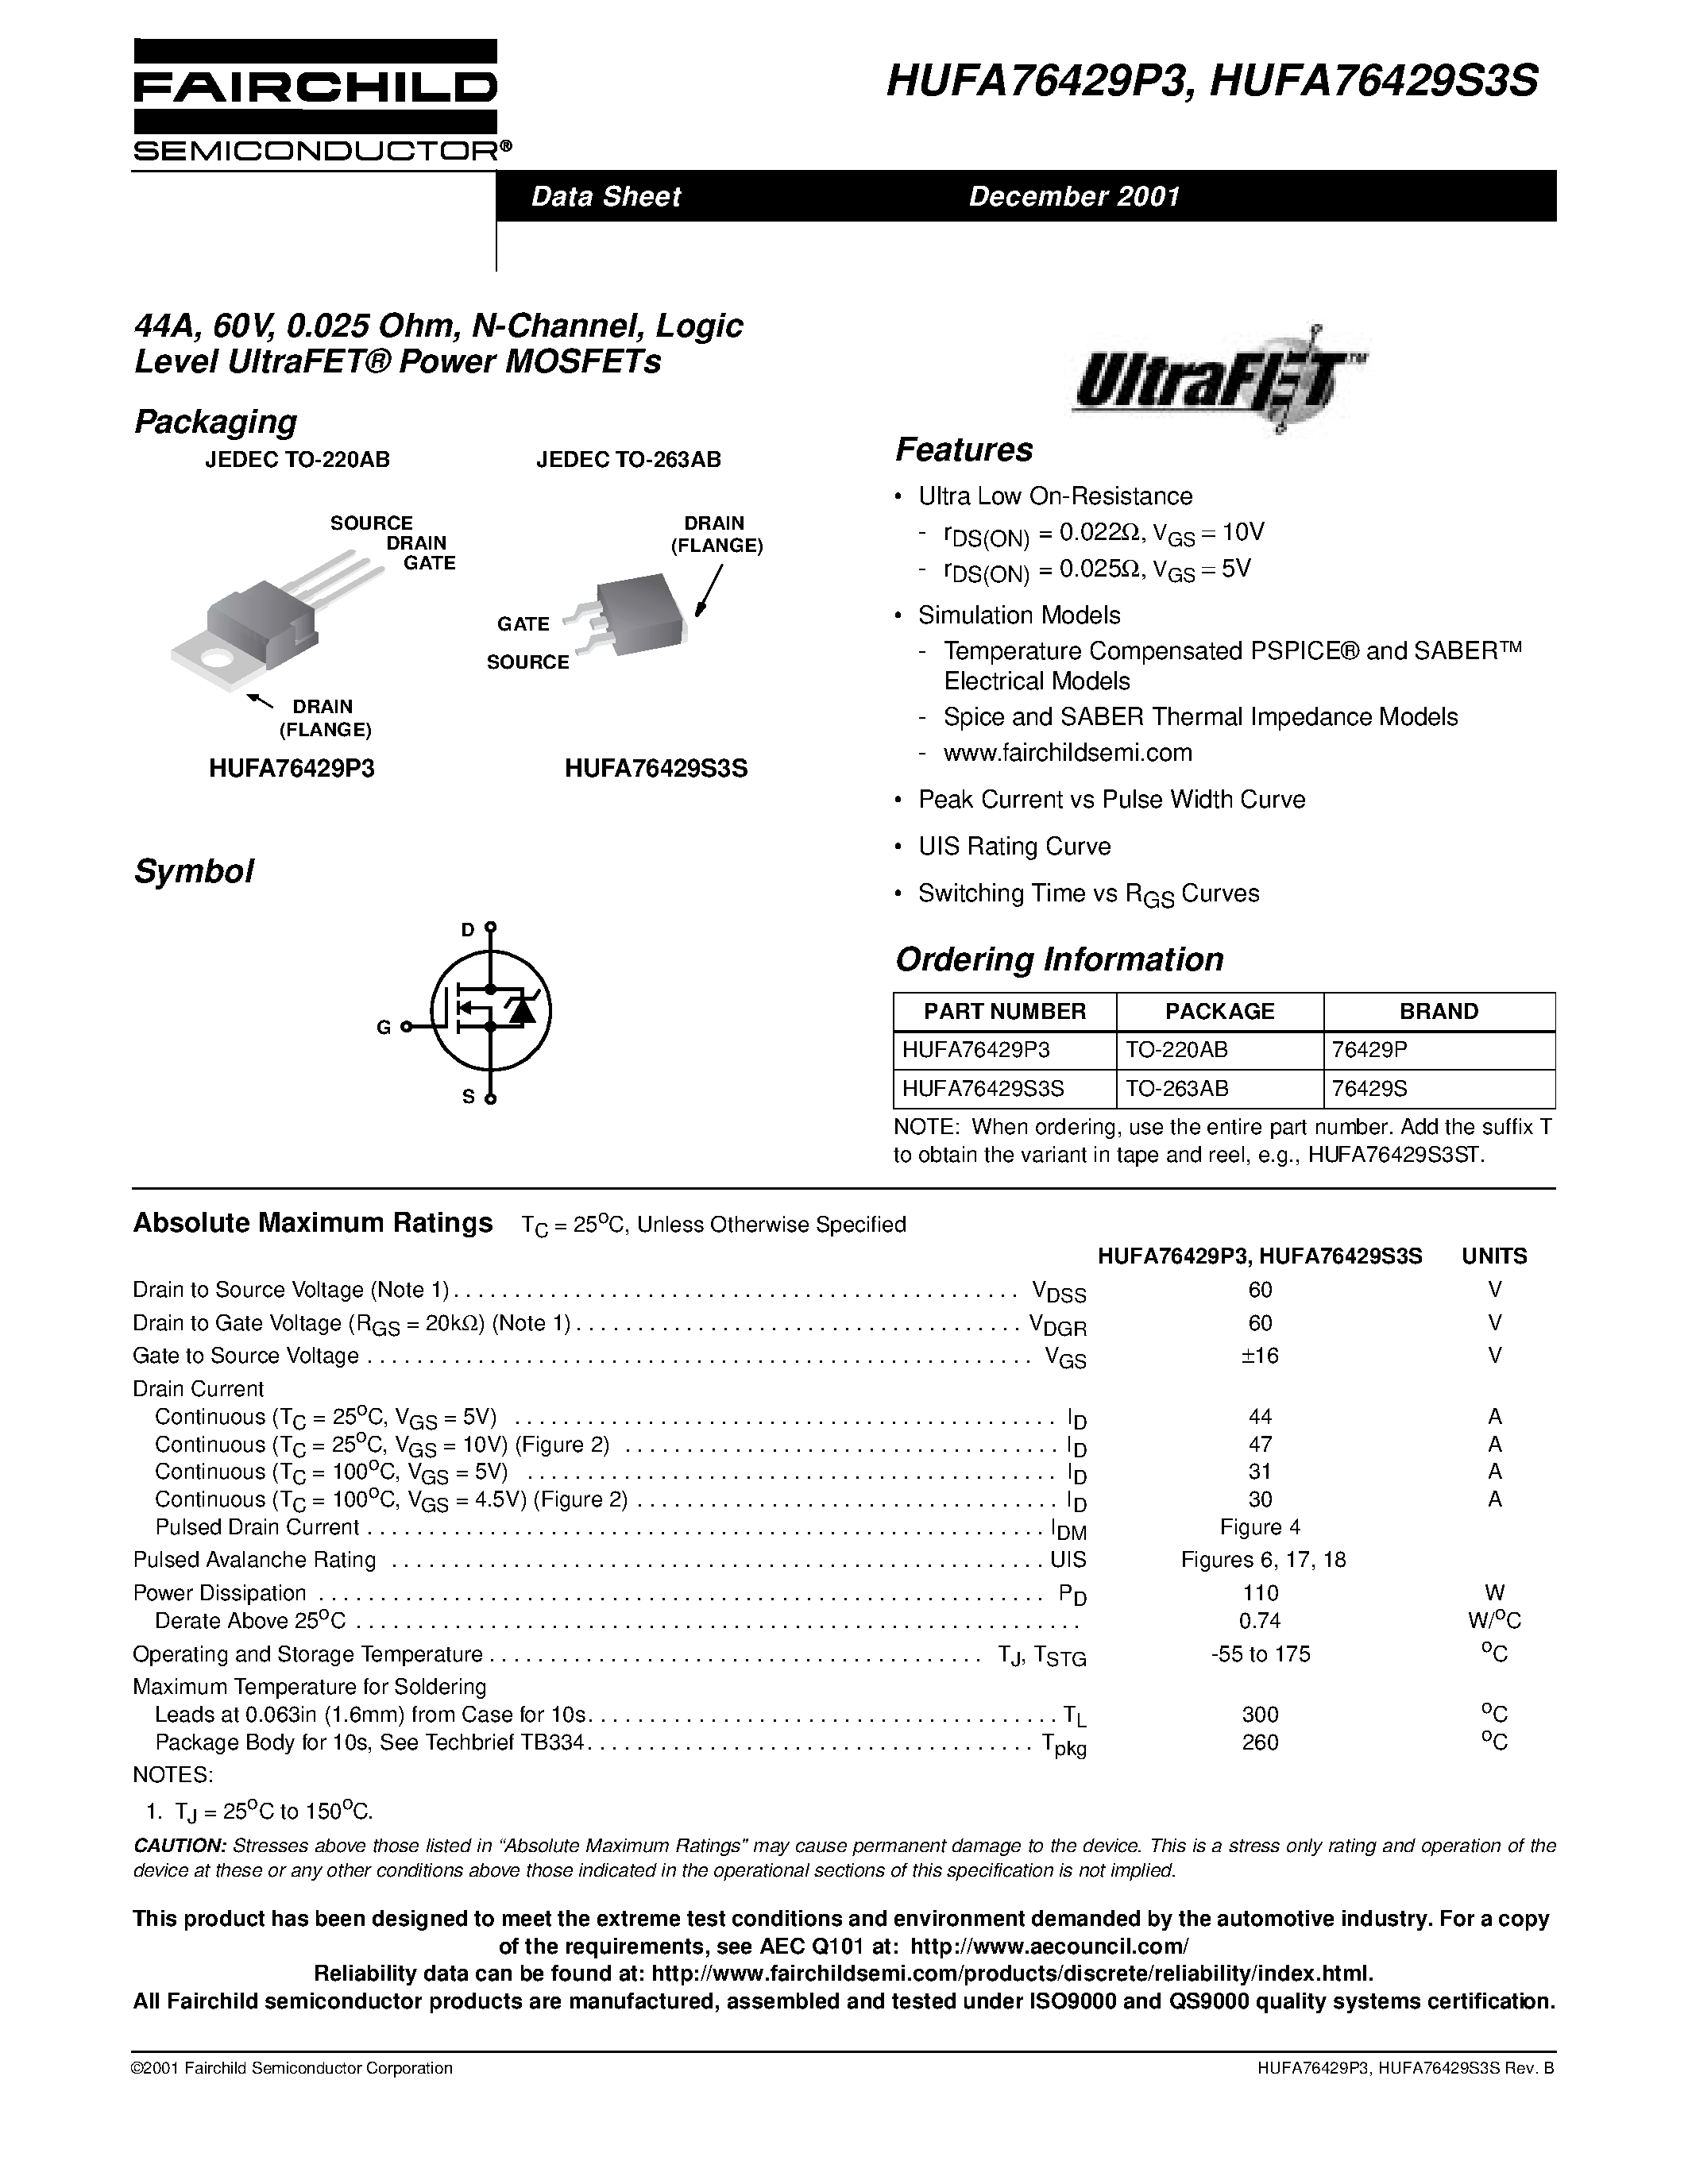 Datasheet HUFA76429S3S - 44A/ 60V/ 0.025 Ohm/ N-Channel/ Logic Level UltraFET Power MOSFETs page 1